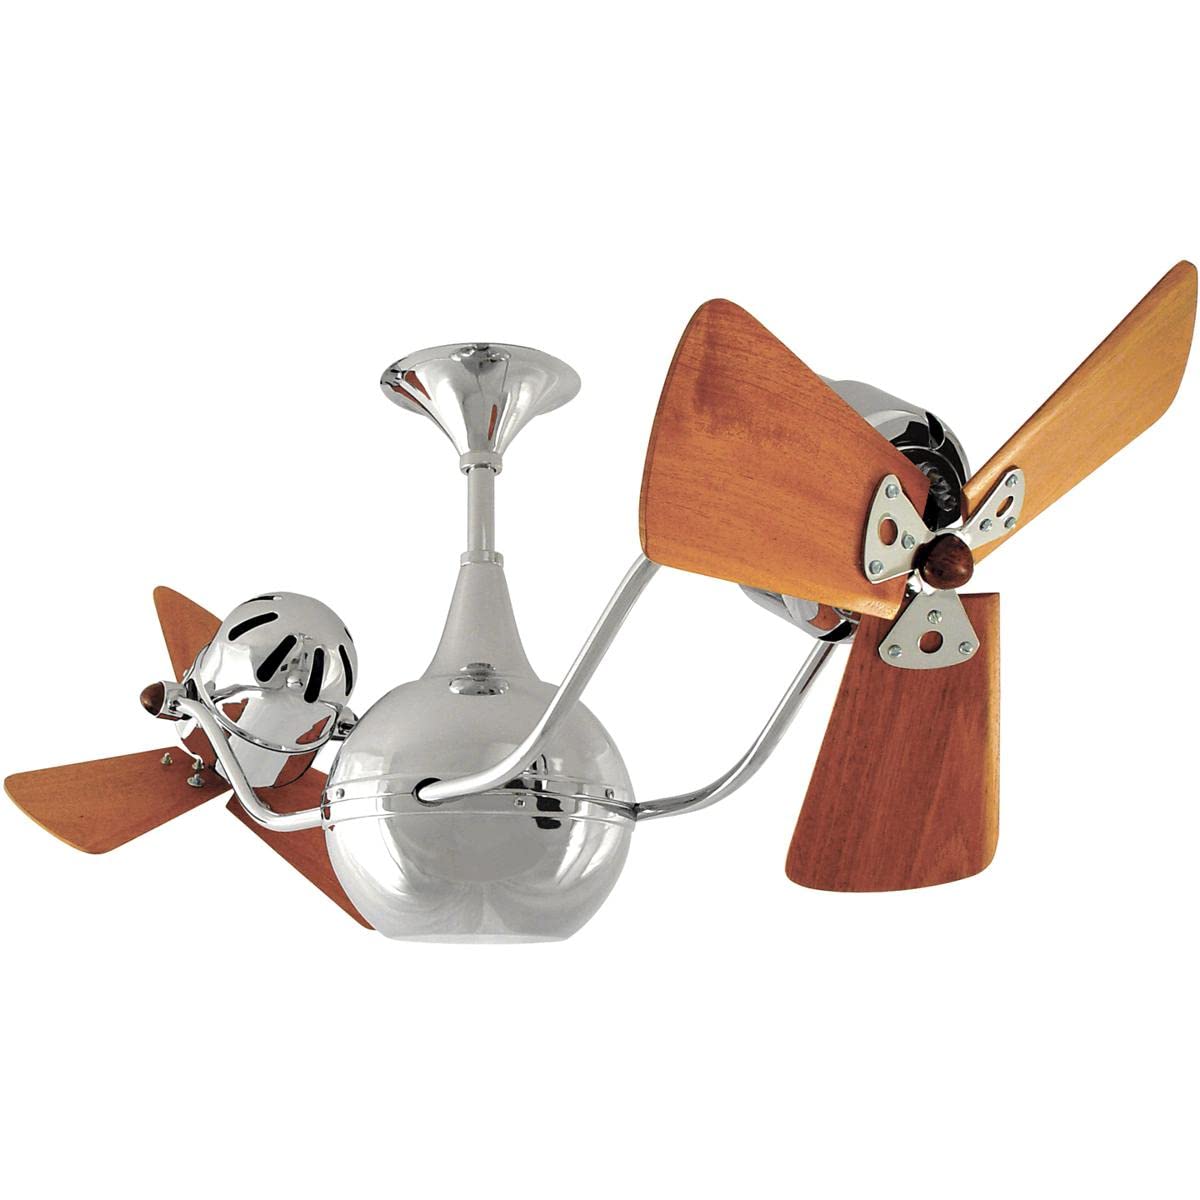 Matthews Fan VB-CR-WD-DAMP Vent-Bettina 360° dual headed rotational ceiling fan in polished chrome finish with solid sustainable mahogany wood blades for damp location.